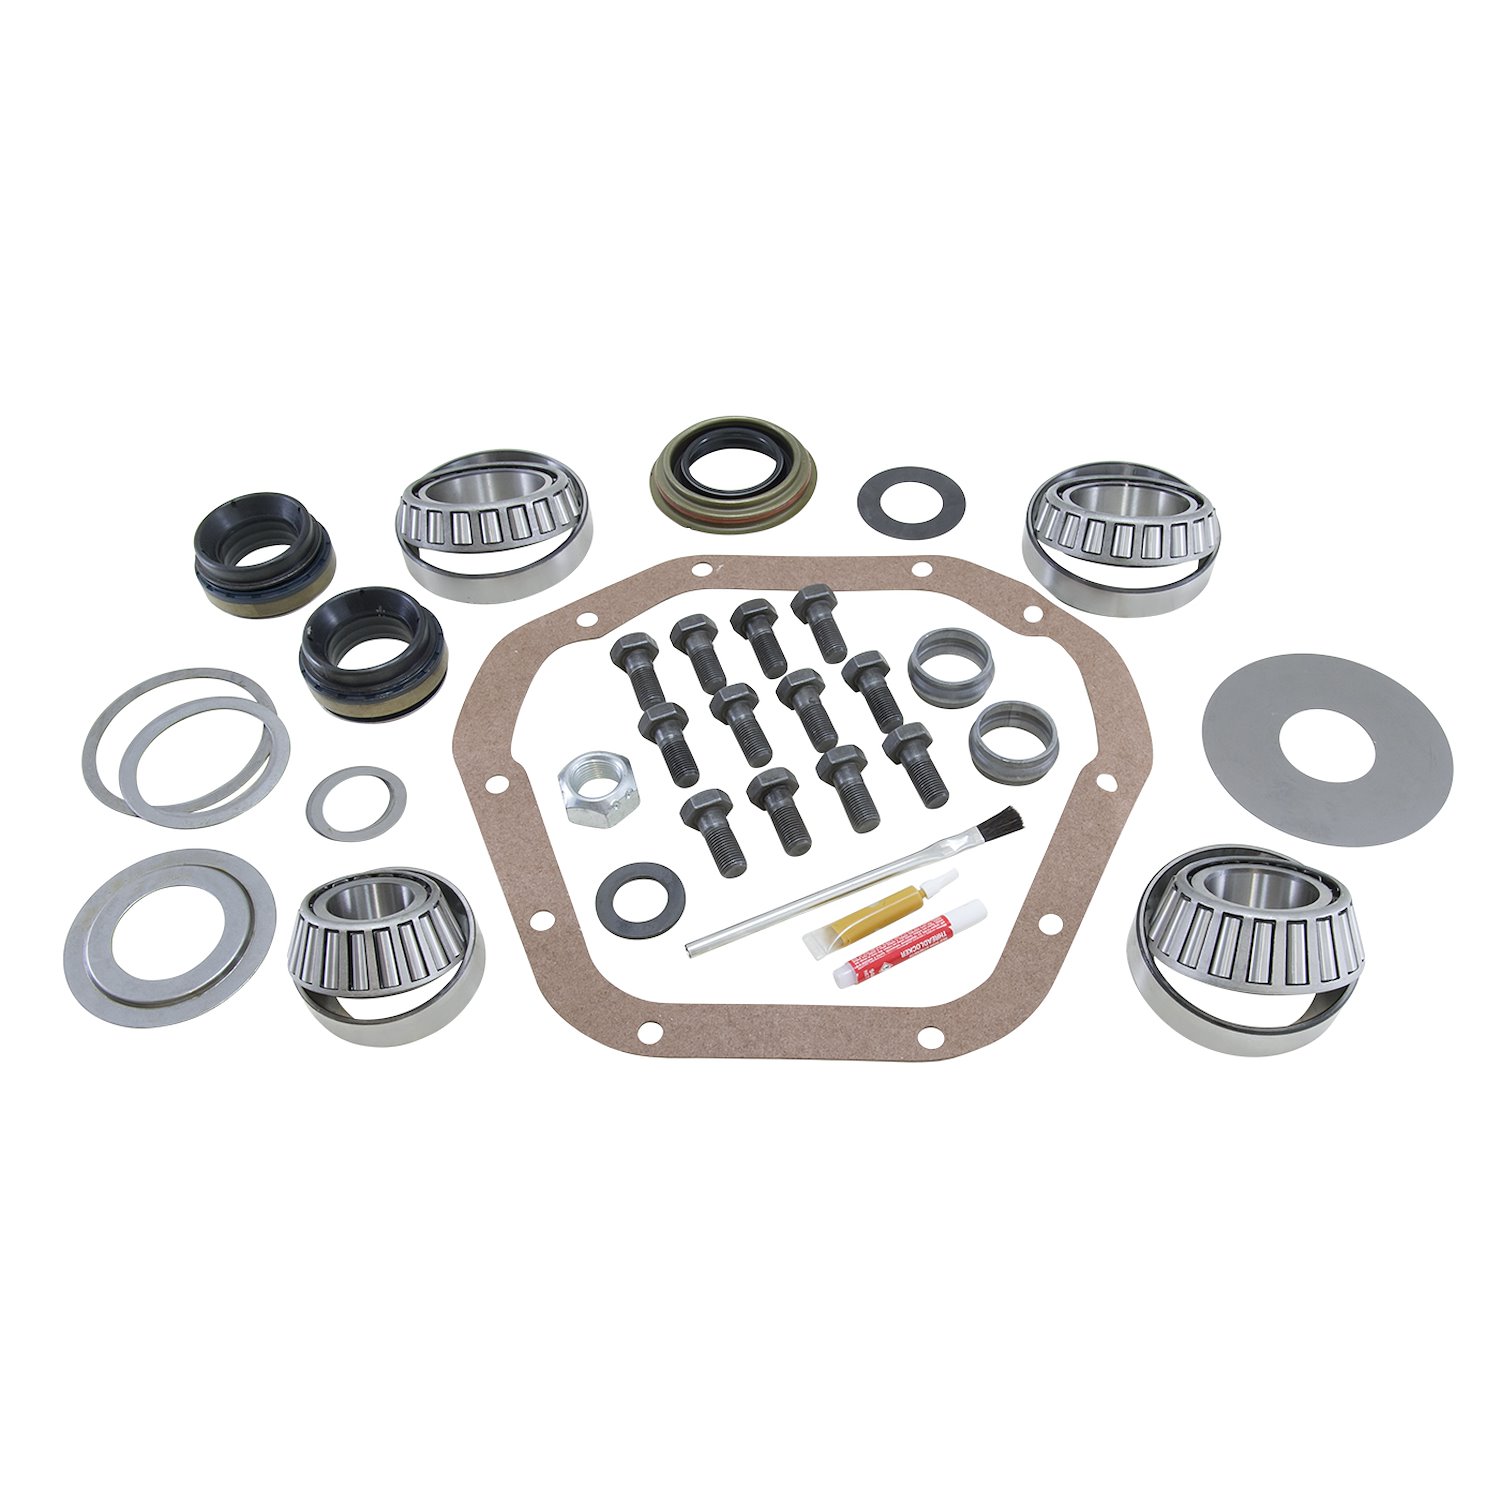 USA Standard ZK D60-SUP Master Overhaul Kit, For Dana in.Super in. 60 Front